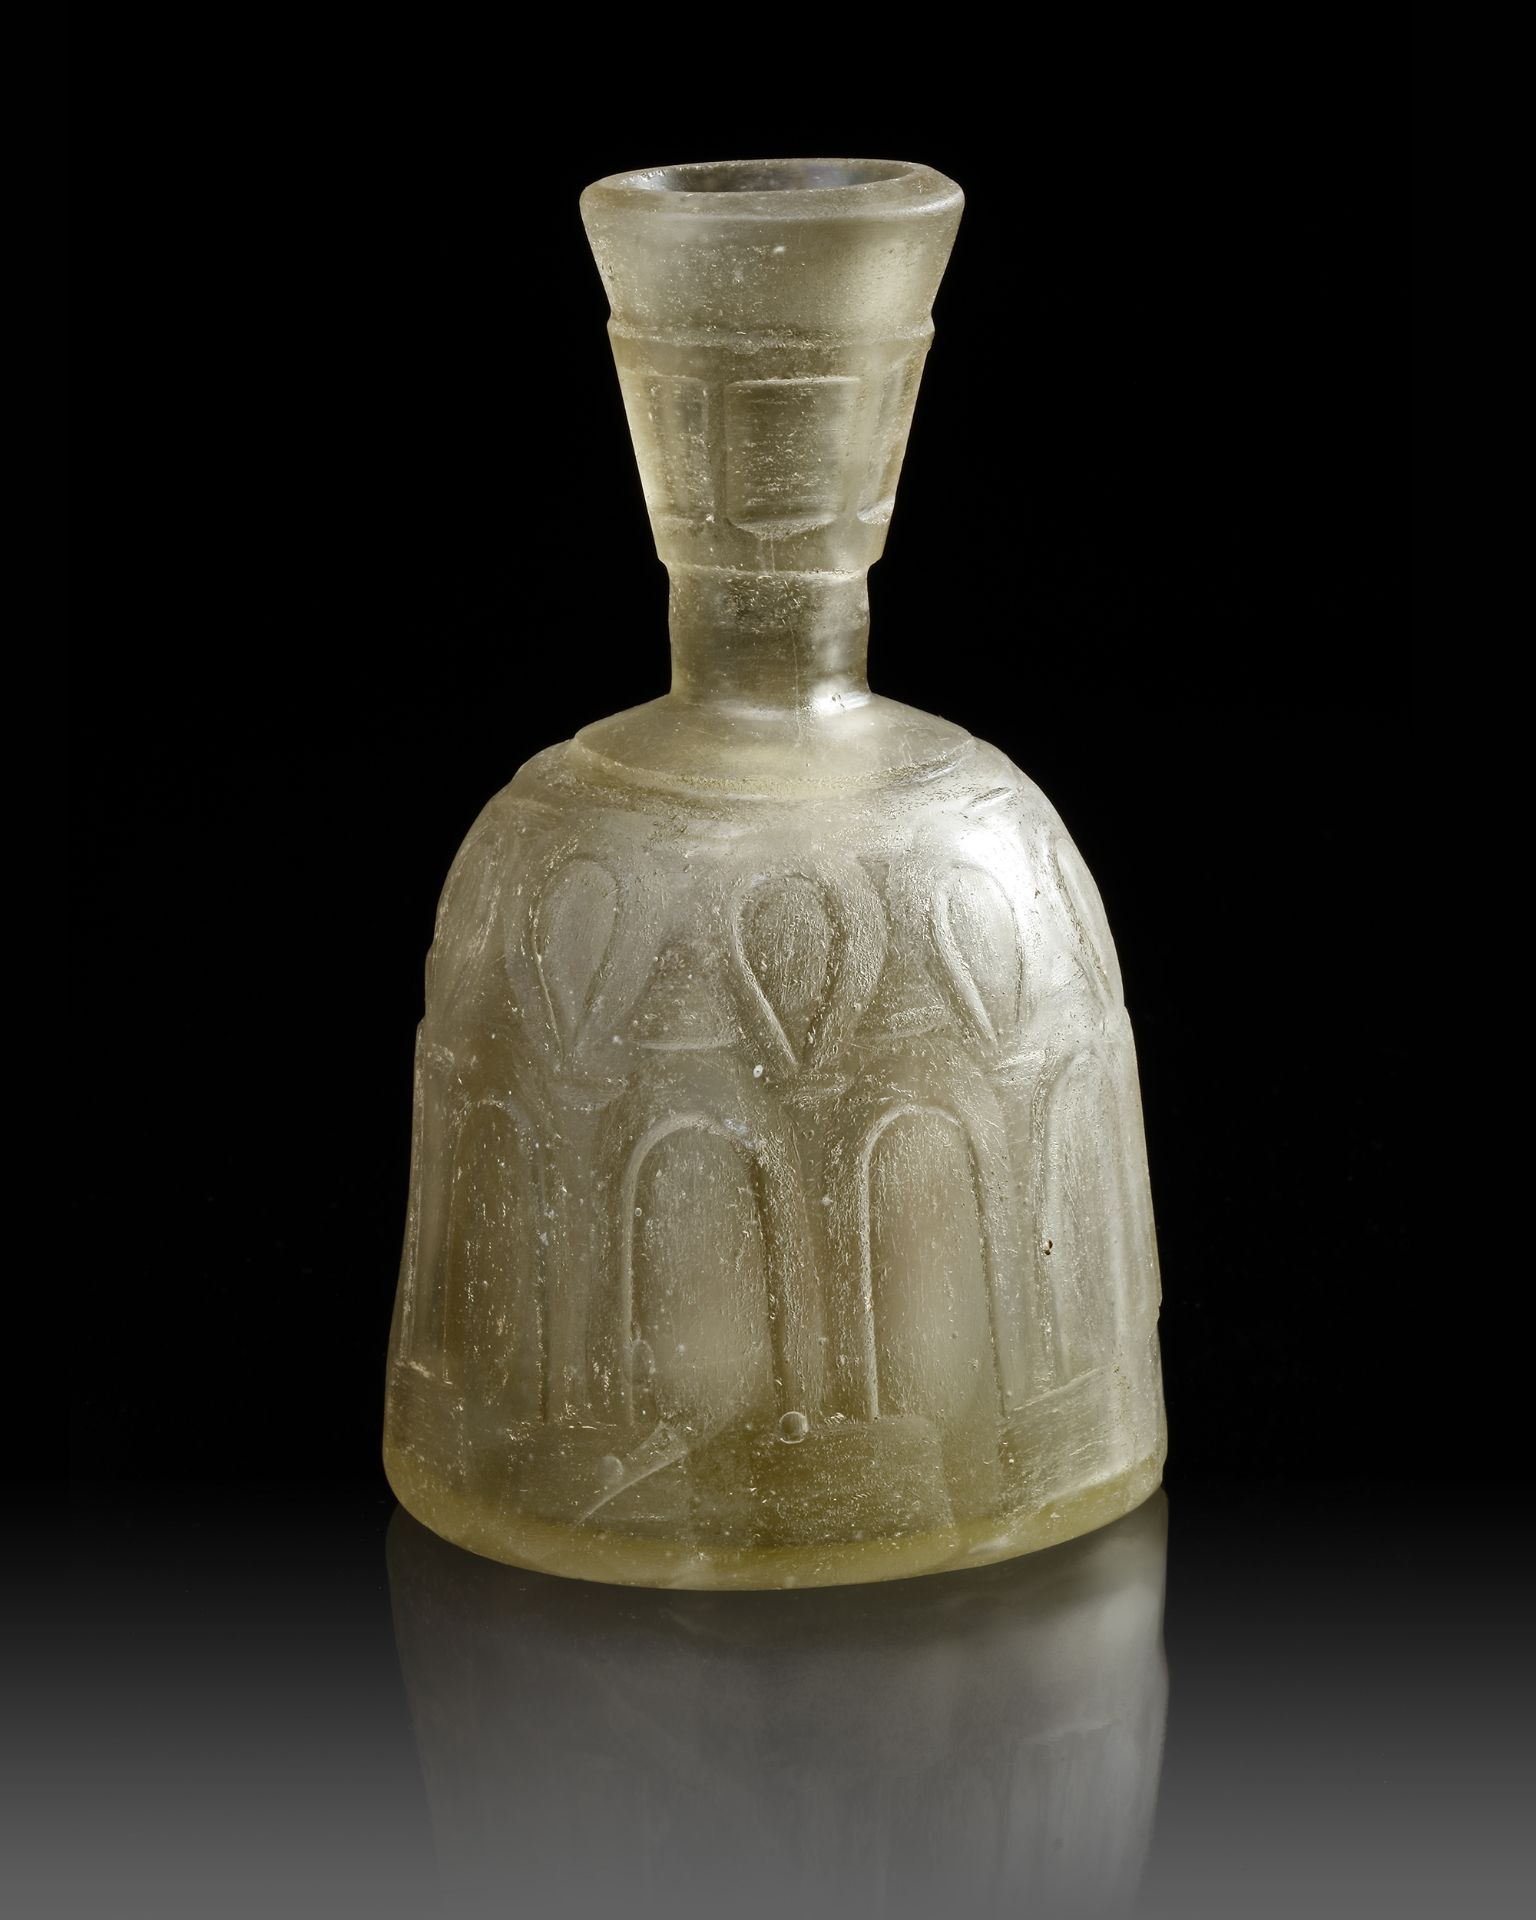 A WHEEL-CUT CLEAR GLASS BOTTLE NORTH EAST PERSIA, 9TH-10TH CENTURY - Image 6 of 9